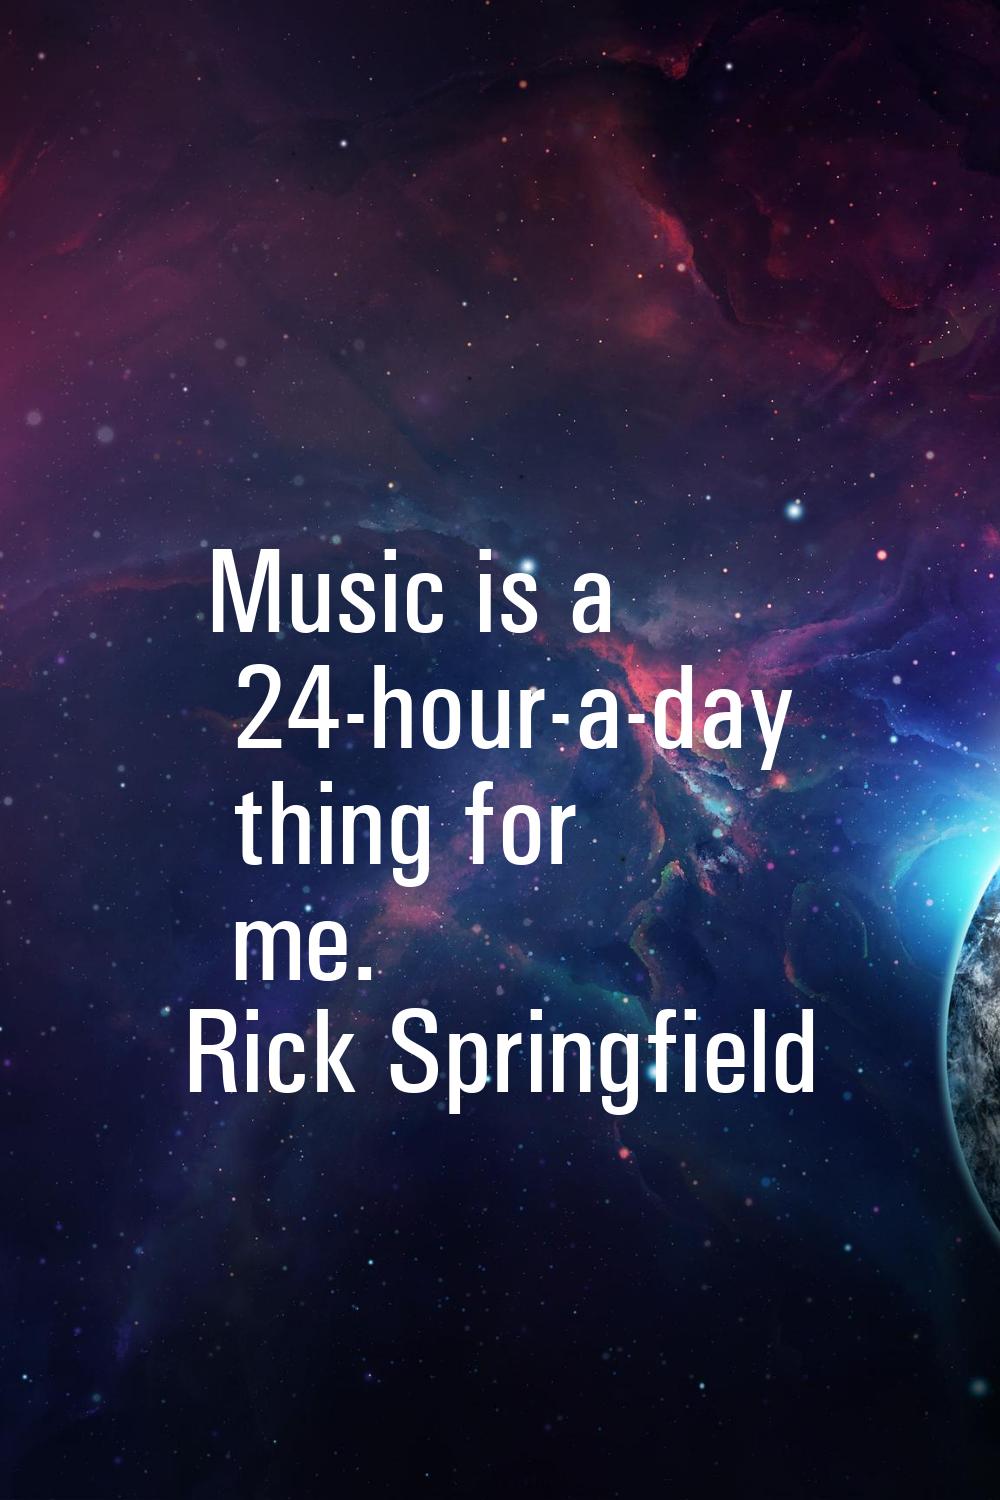 Music is a 24-hour-a-day thing for me.